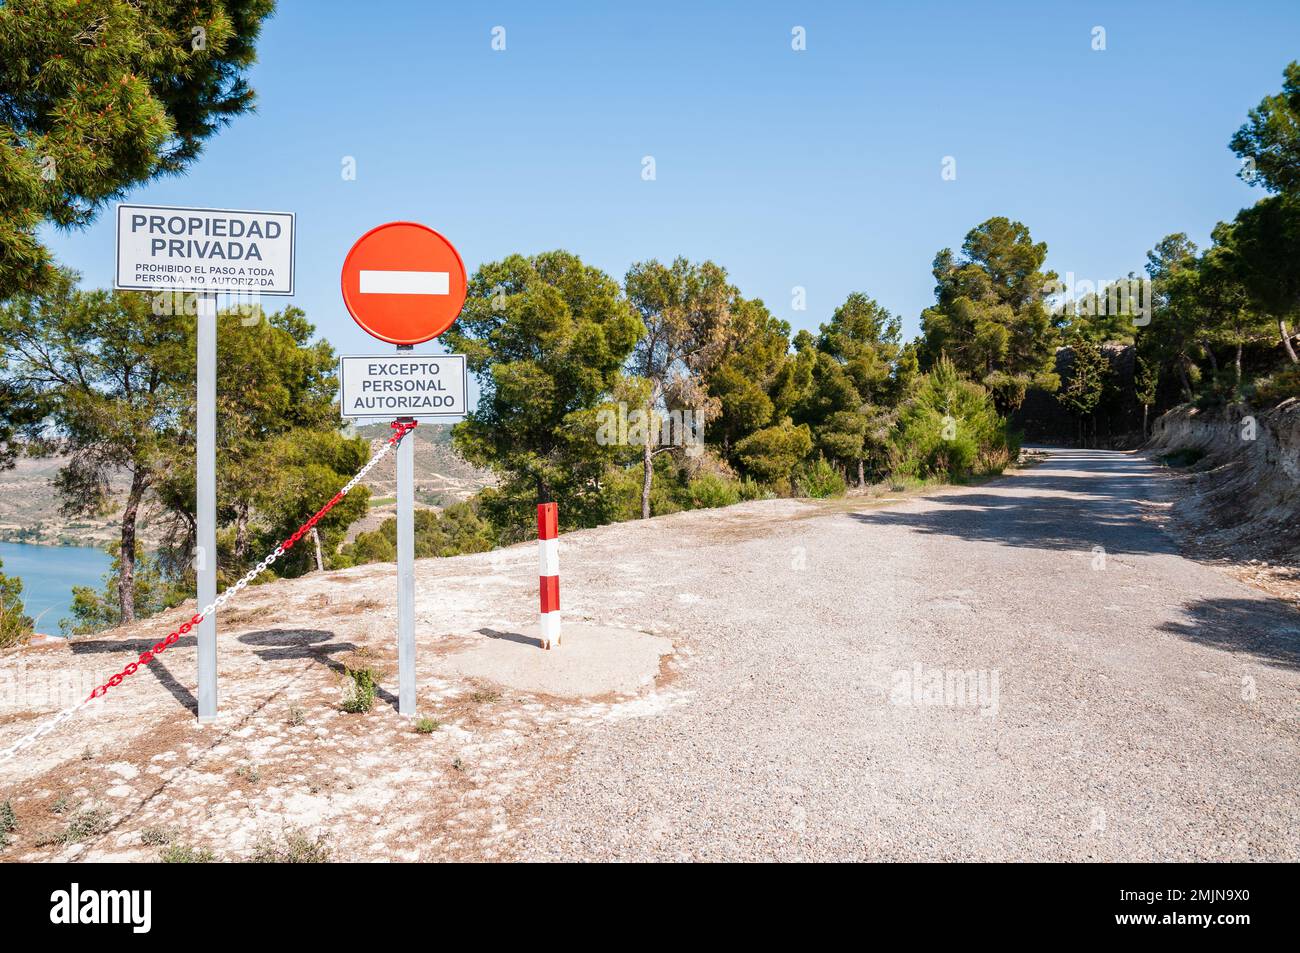 Entry prohibited signal on the acces road for vehicles, Mequinenza castle, Aragon, Spain Stock Photo